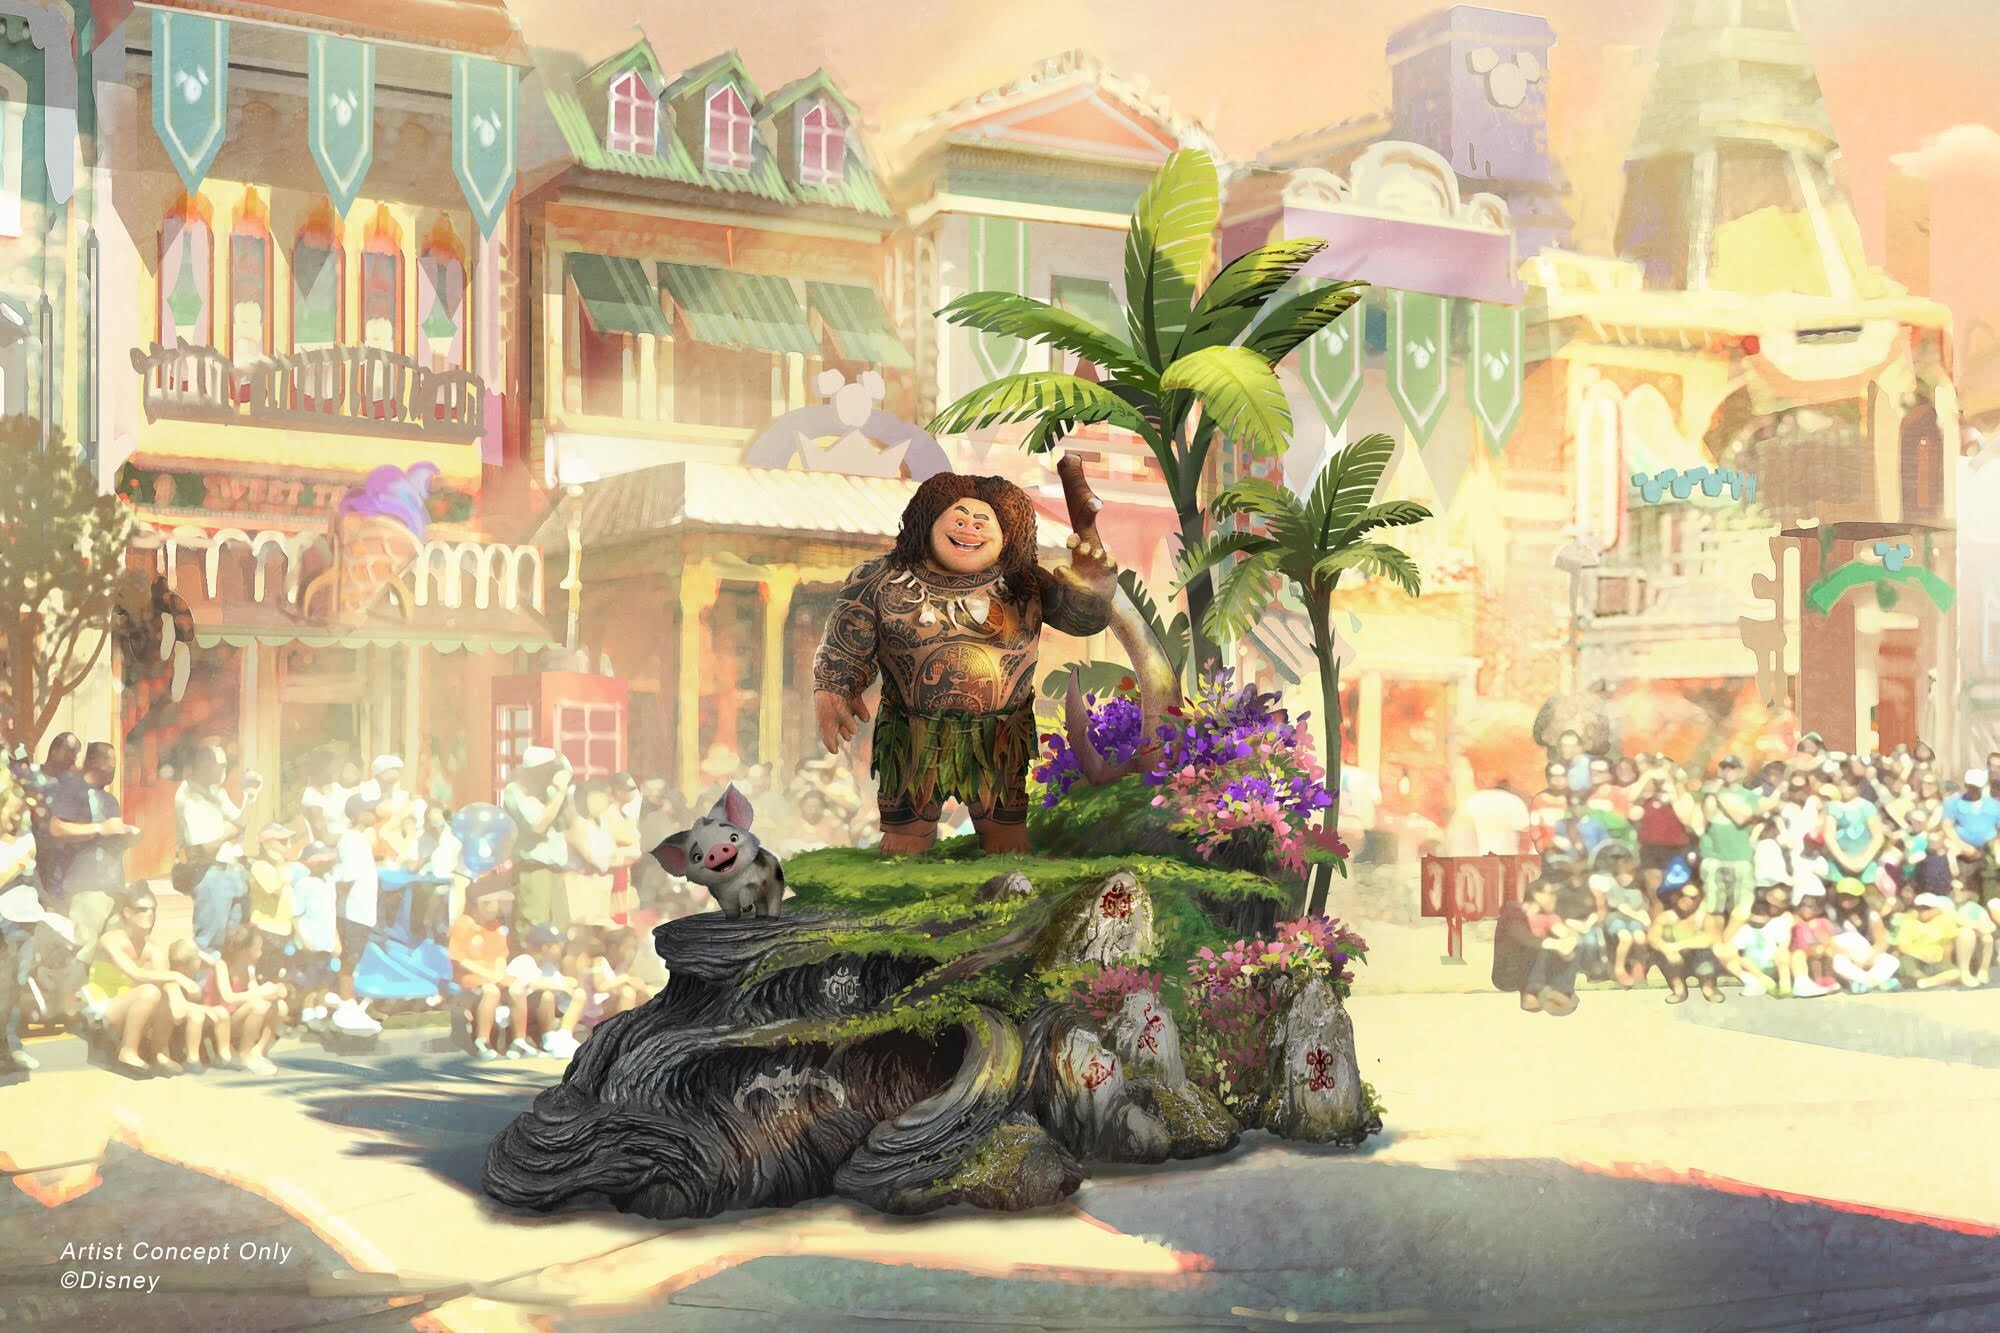 Set to debut Feb. 28, 2020, at Disneyland Park in California, the new “Magic Happens” parade will come to life with an energetic musical score and a new song co-composed by singer-songwriter Todrick Hall. The parade will feature stunning floats, beautiful costumes, and beloved Disney characters. Depicted in this image, guiding Moana on her journey is Maui, who travels along on his own magical piece of the islands with Moana’s adorable pet pig, Pua. (Disney)